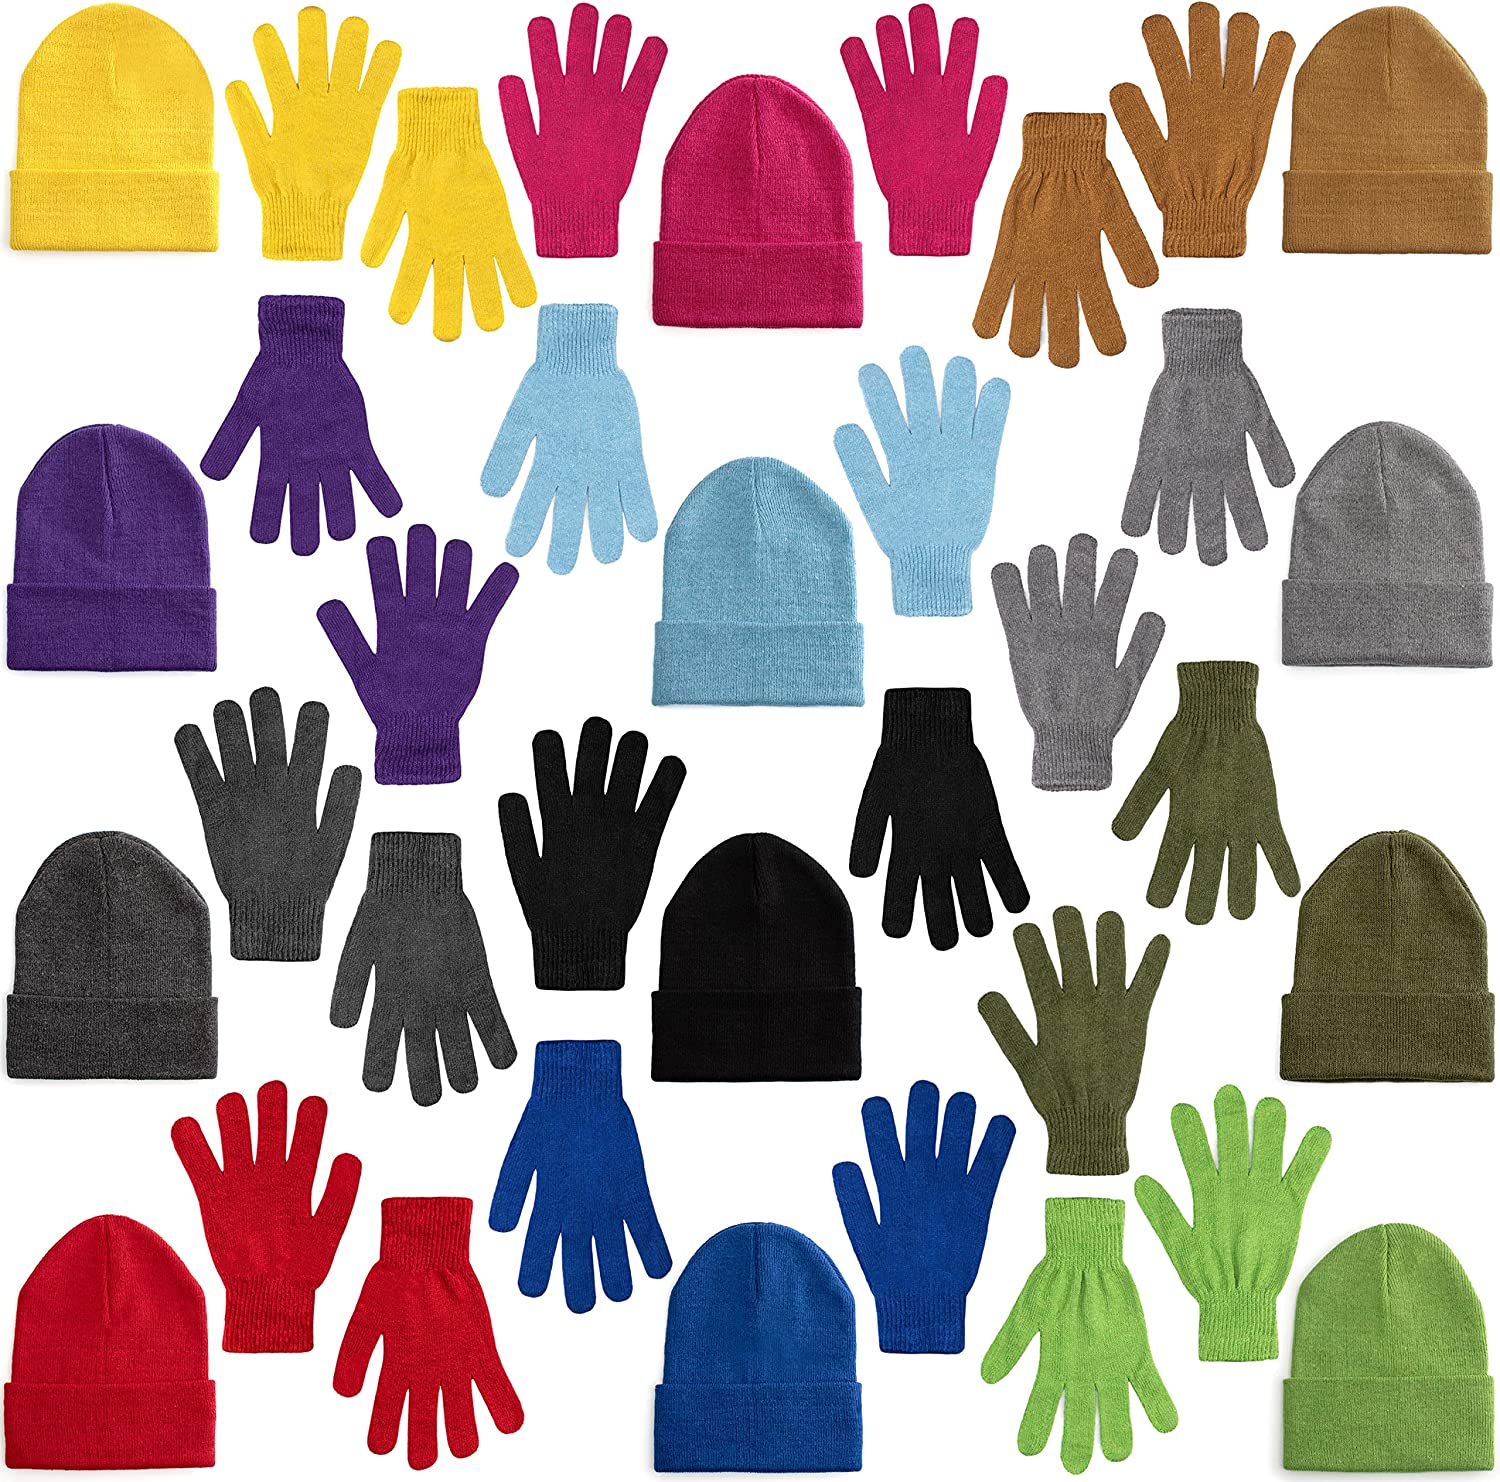 24 Set Wholesale Beanie, Glove and Scarf Bundle in 5 Assorted Colors 